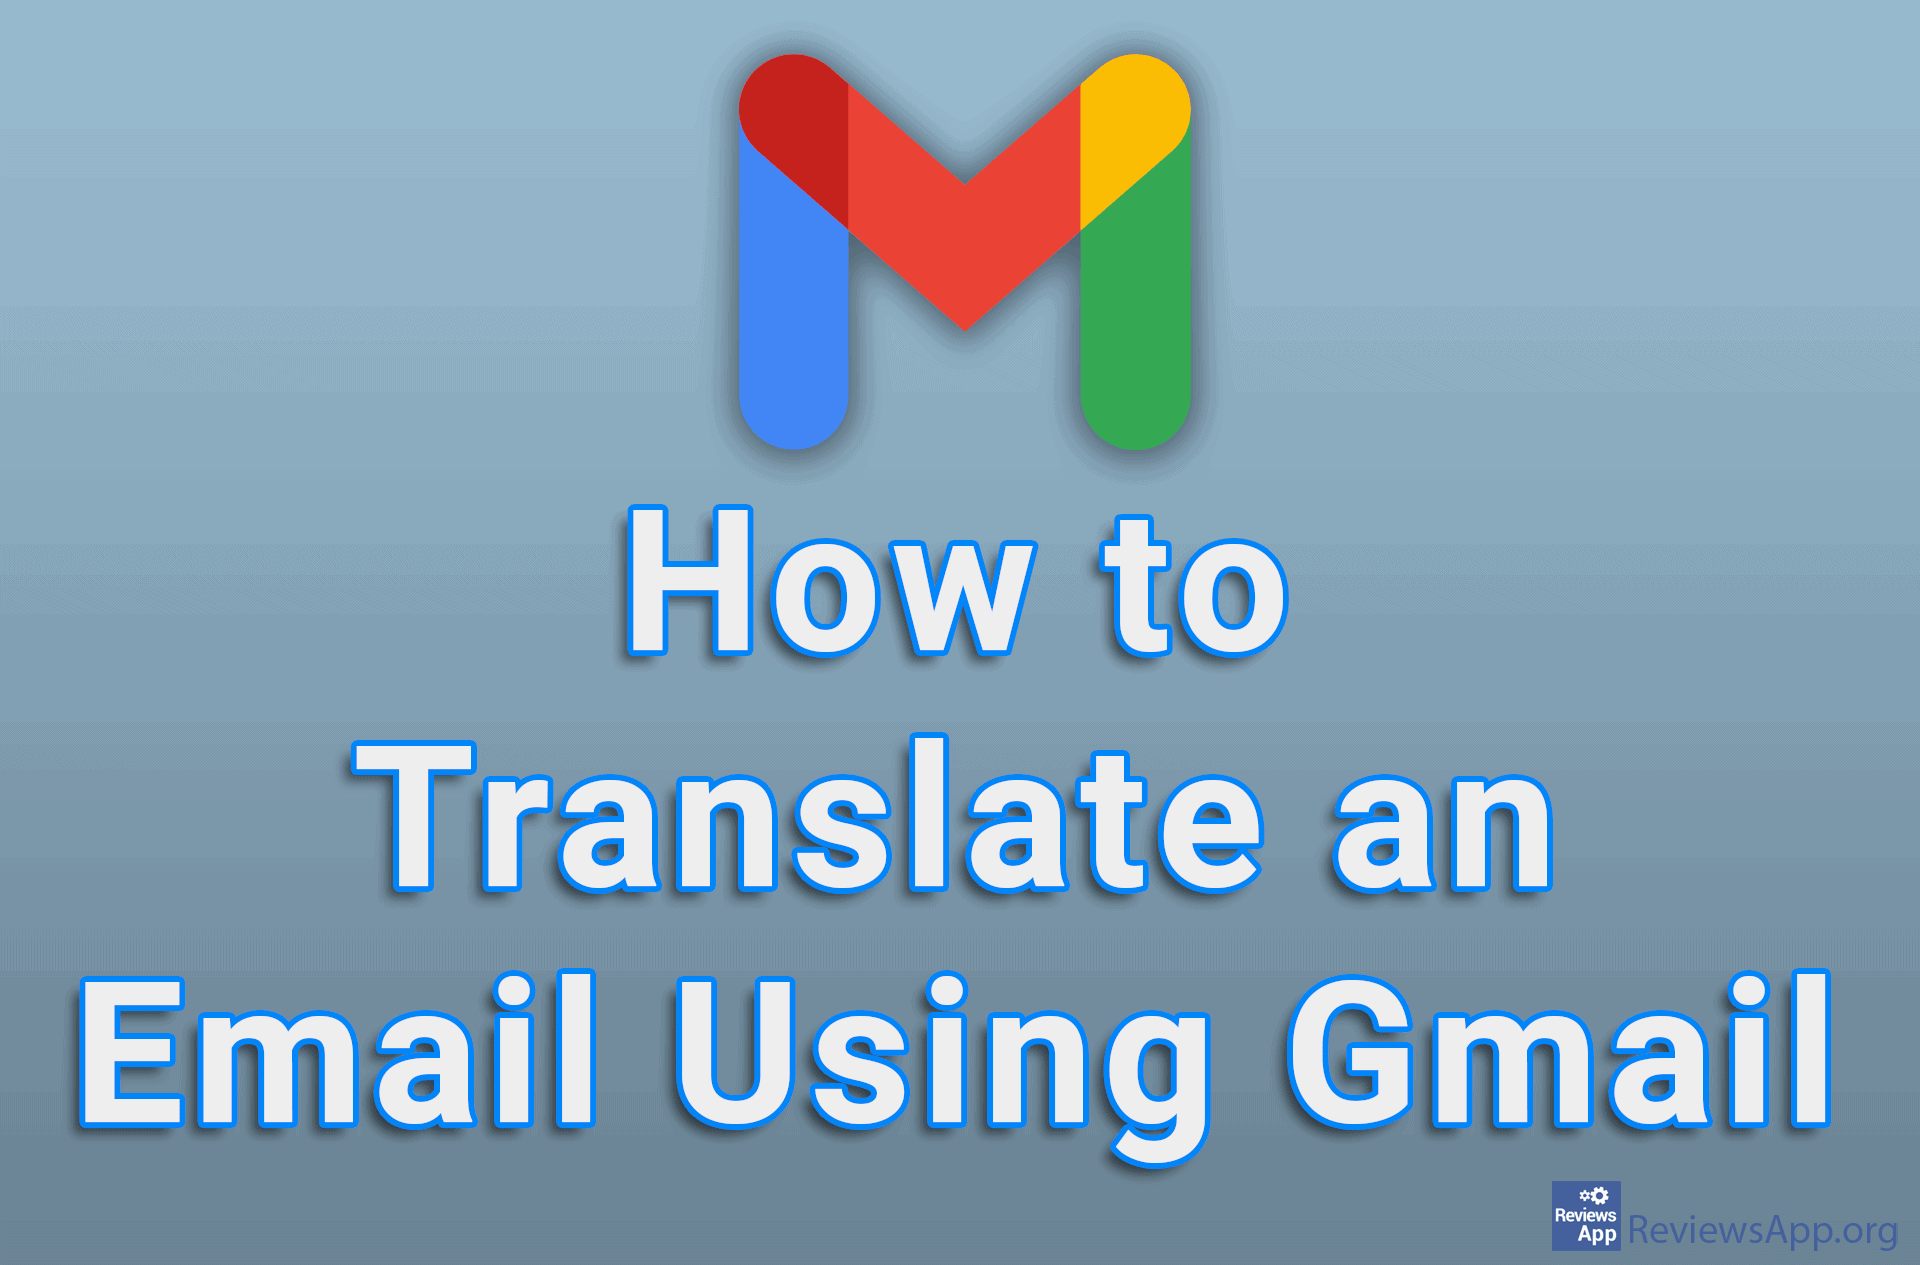 How to Translate an Email Using Gmail